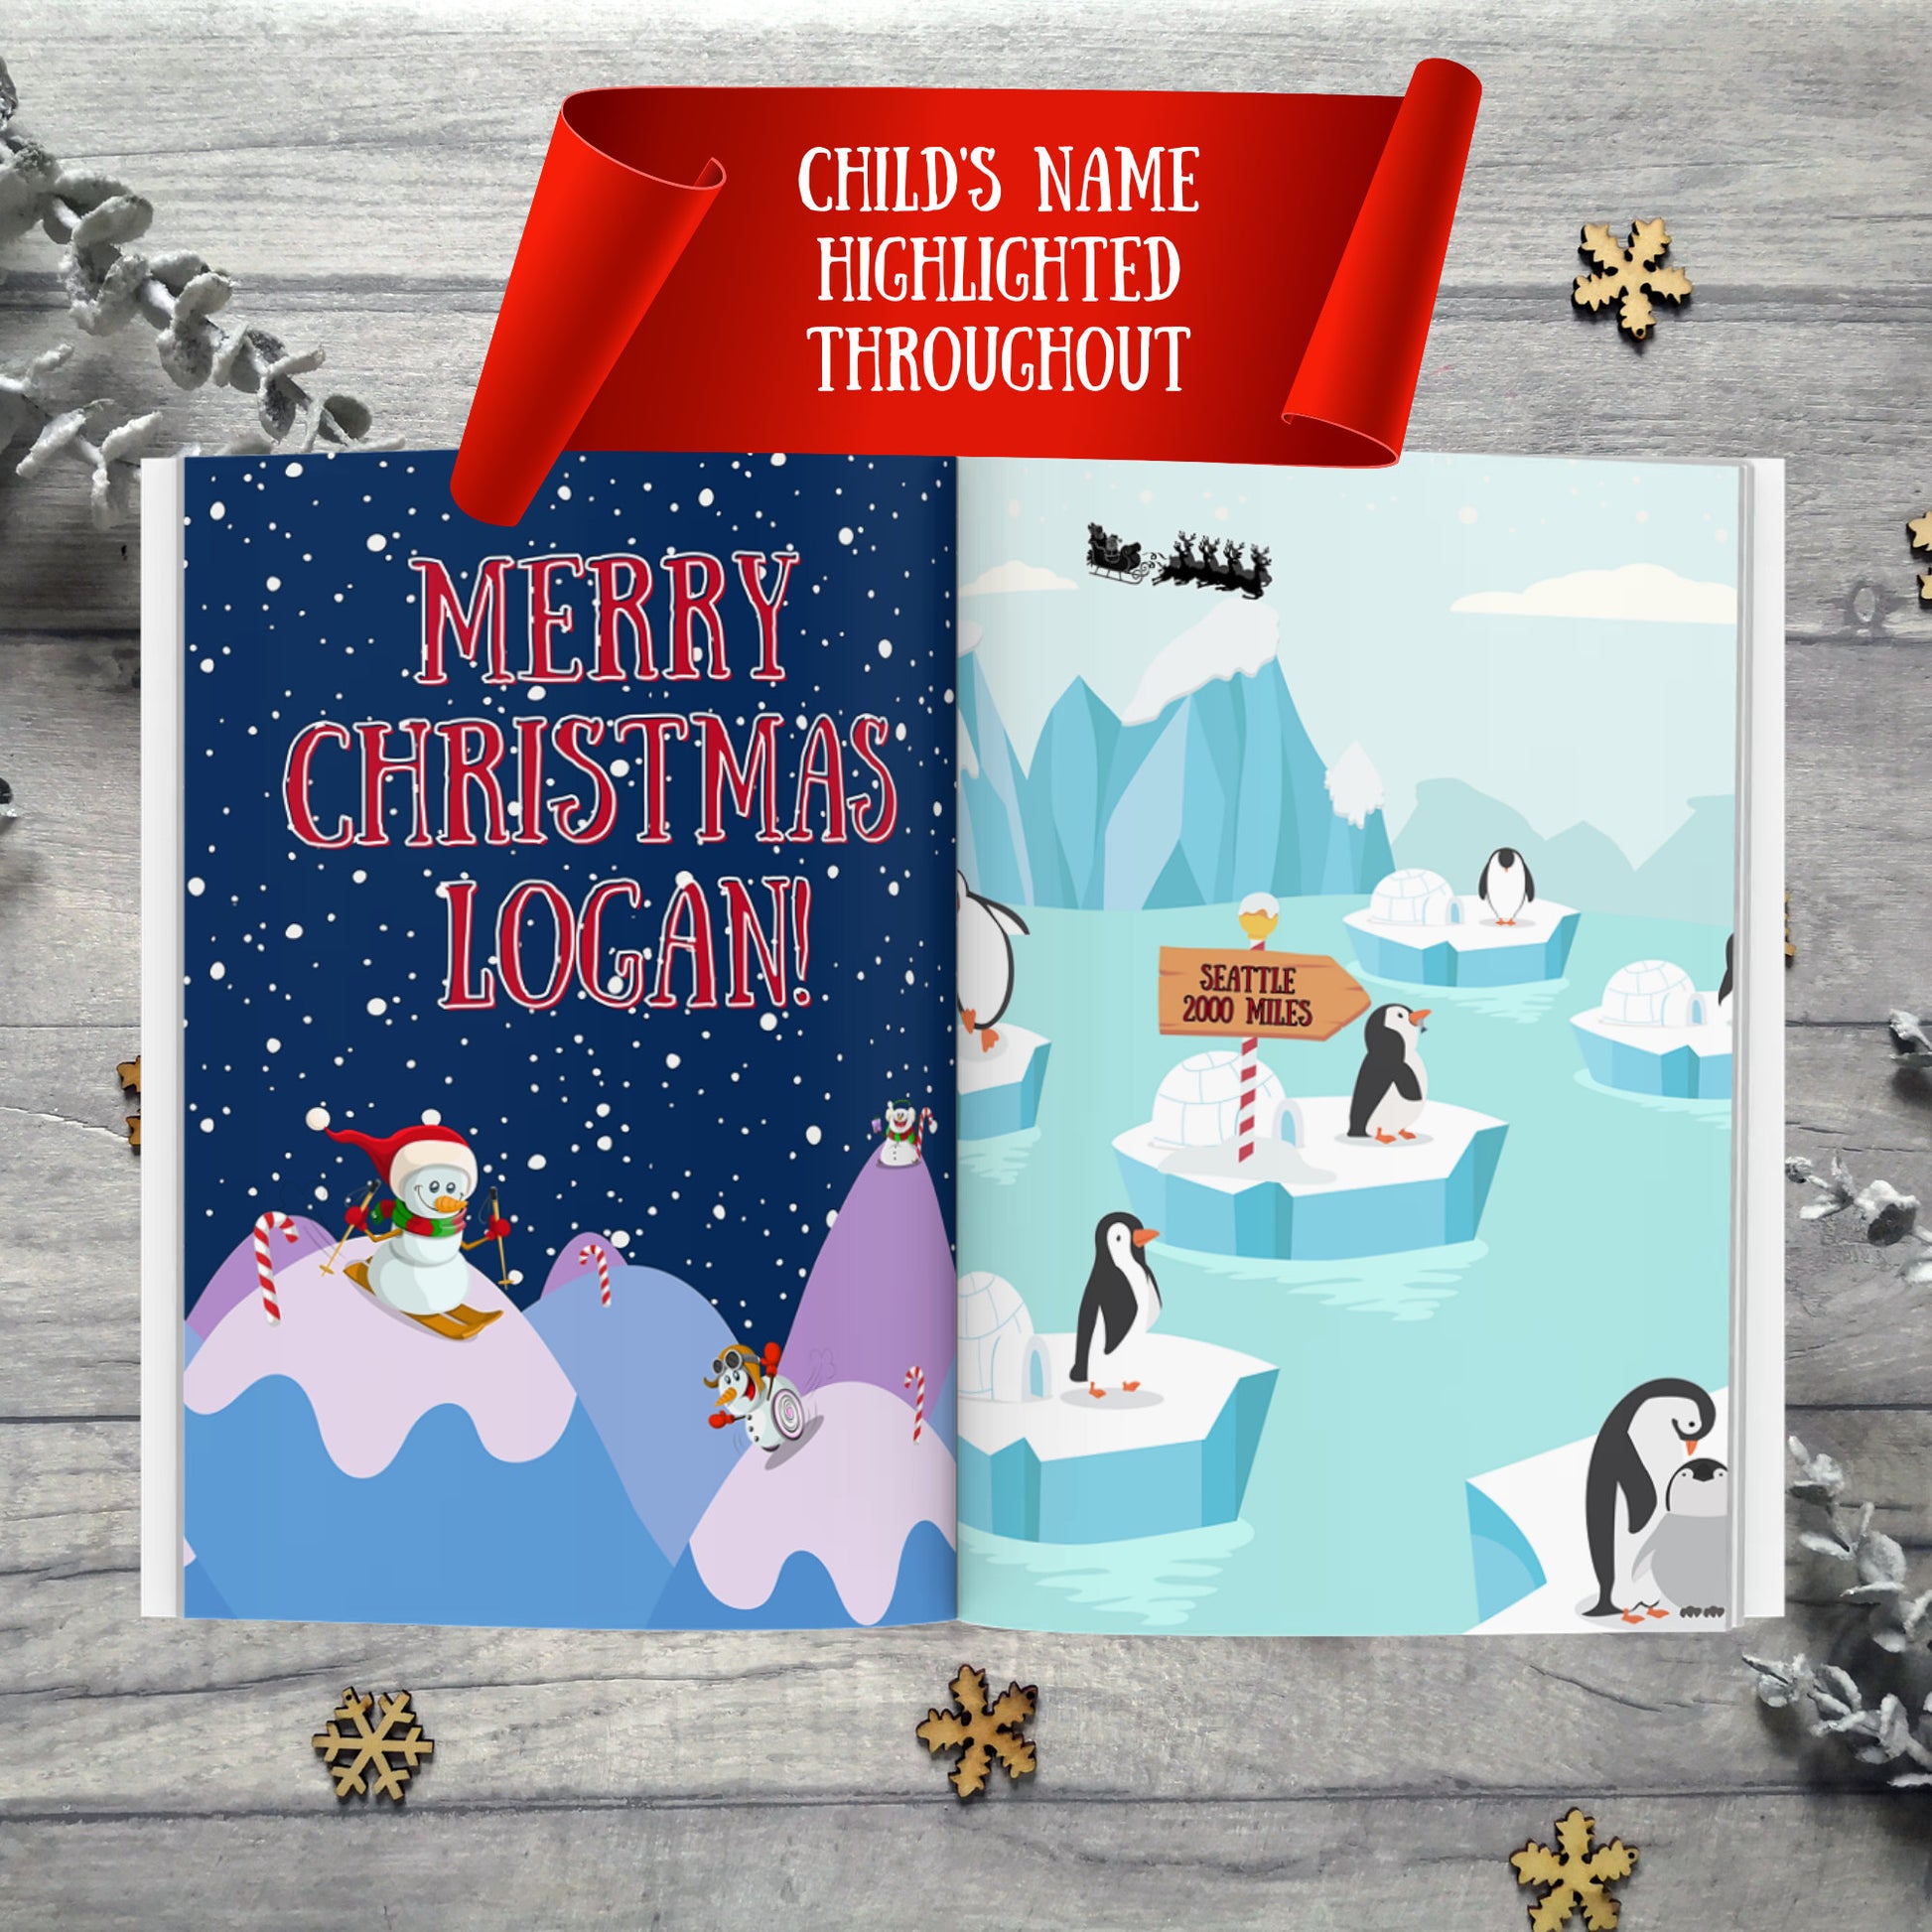 The Night Before Christmas - Personalized Children’s Book - Custom Children’s Xmas Book, a Classic Christmas Story w/child’s name